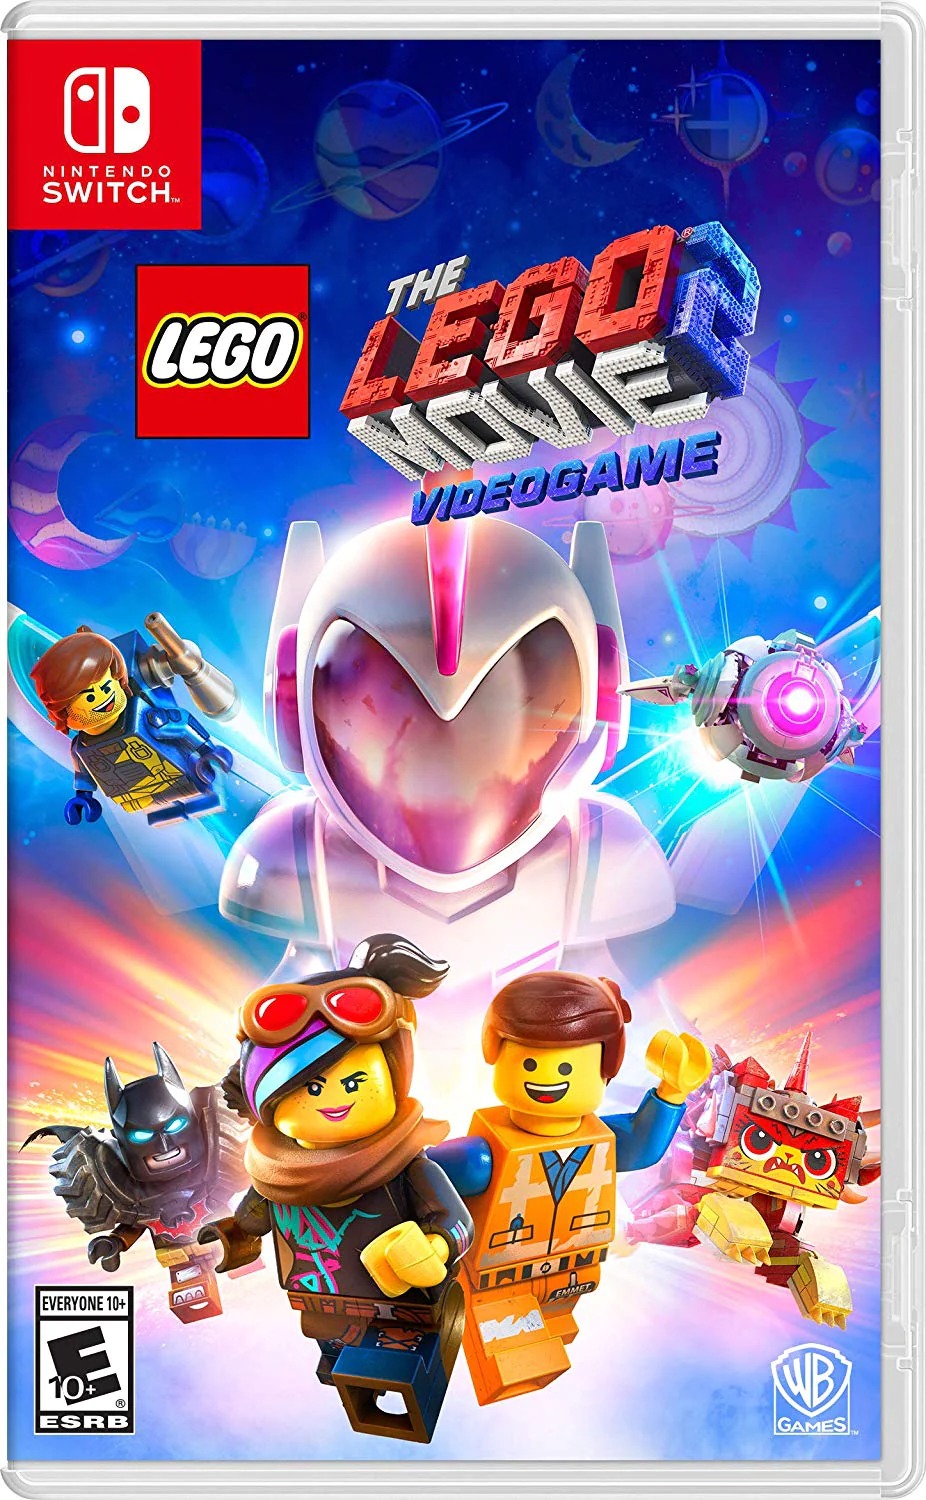 The Lego Movie 2 for Nintendo Switch